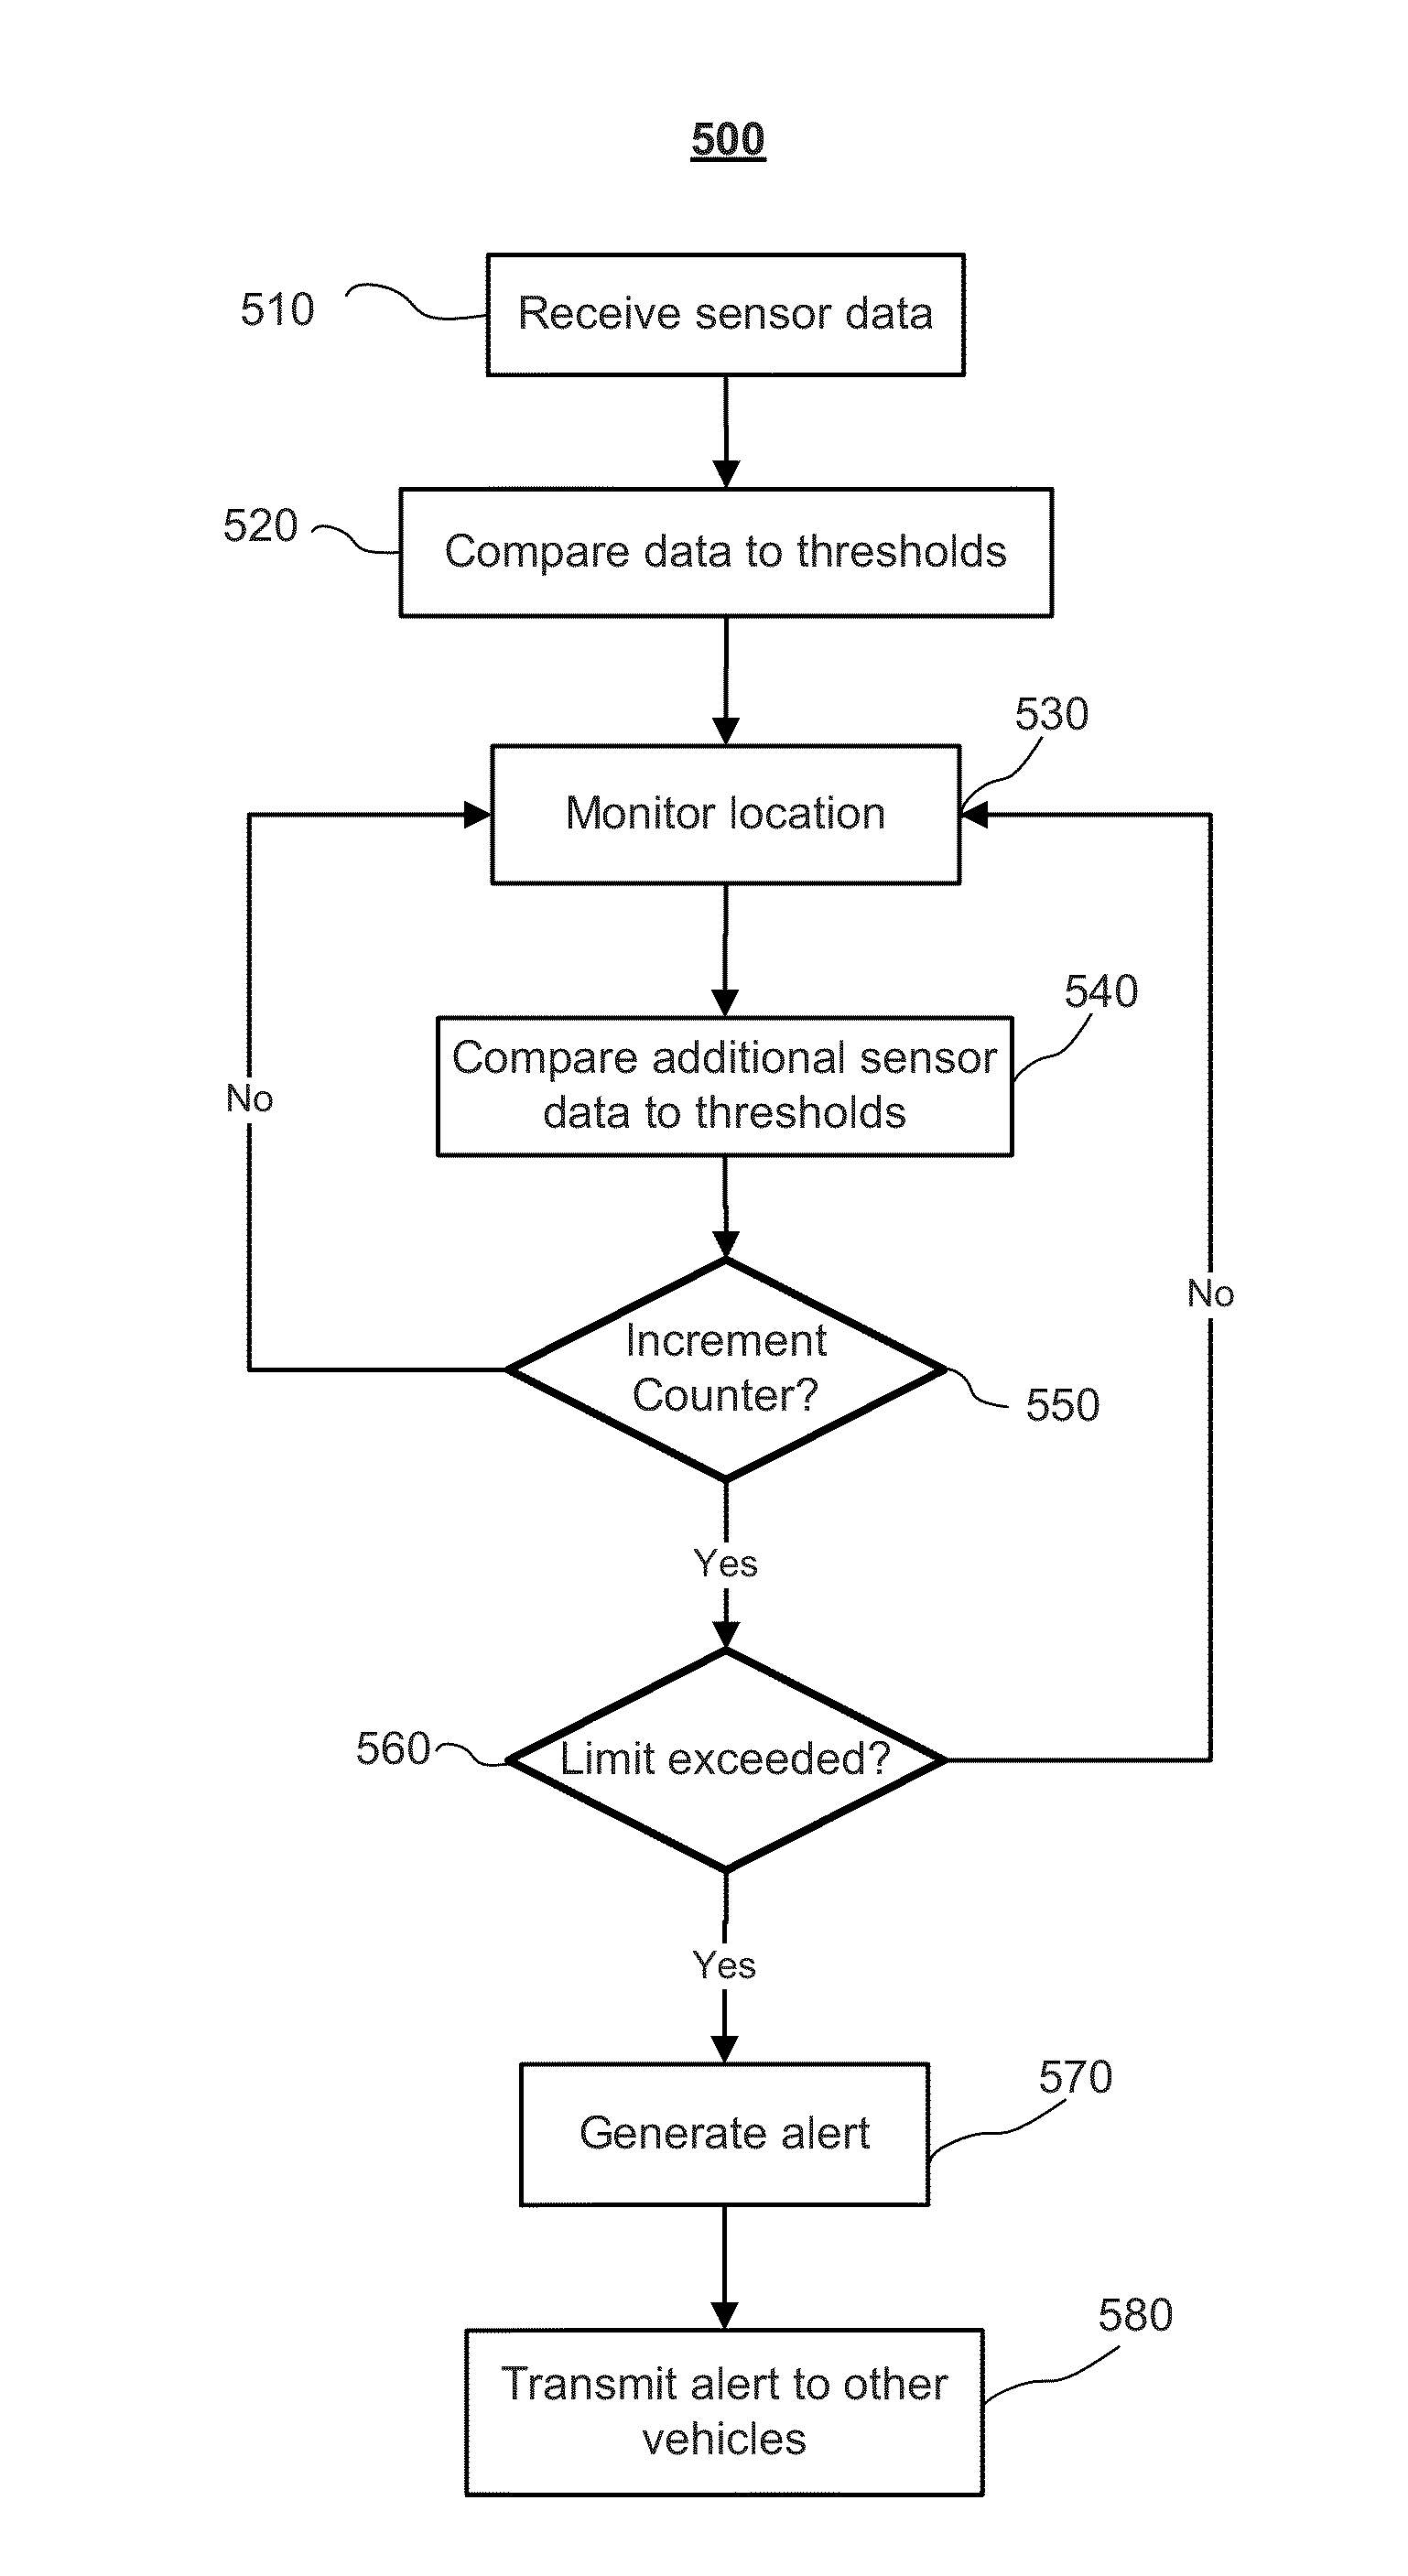 Method and System for Determining Road Conditions Based on Driver Data